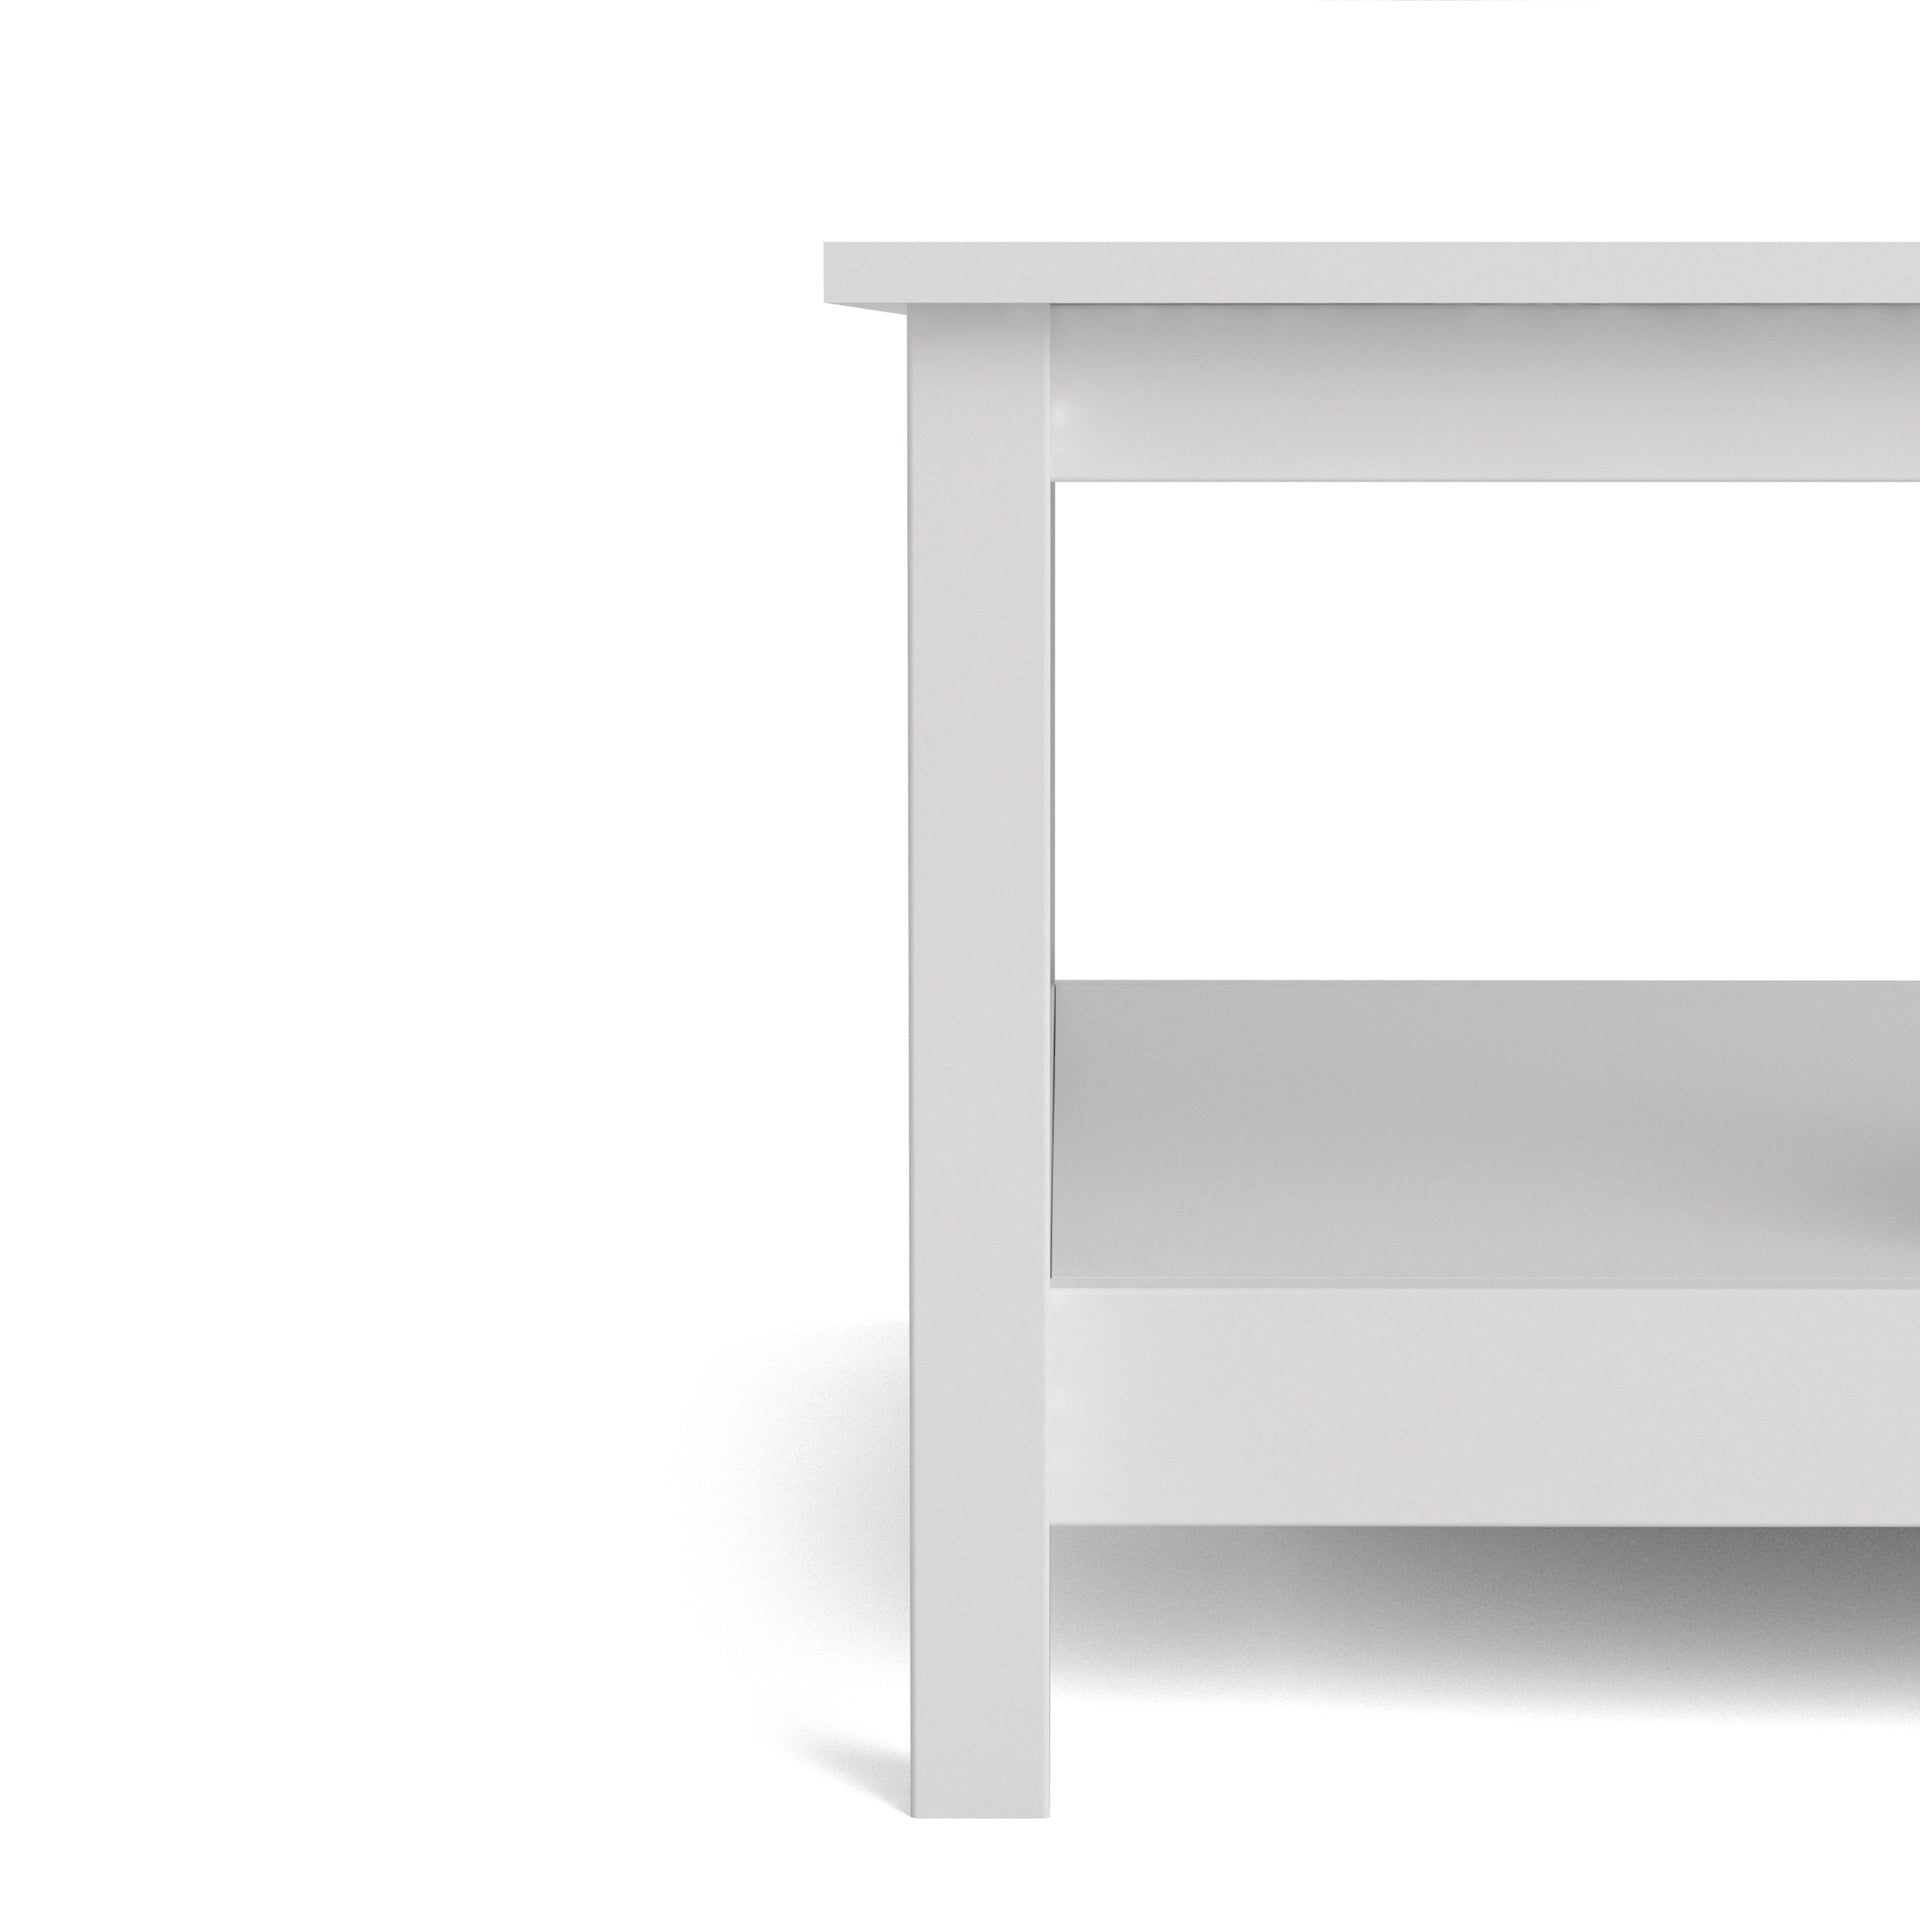 Furniture To Go Madrid Coffee Table in White